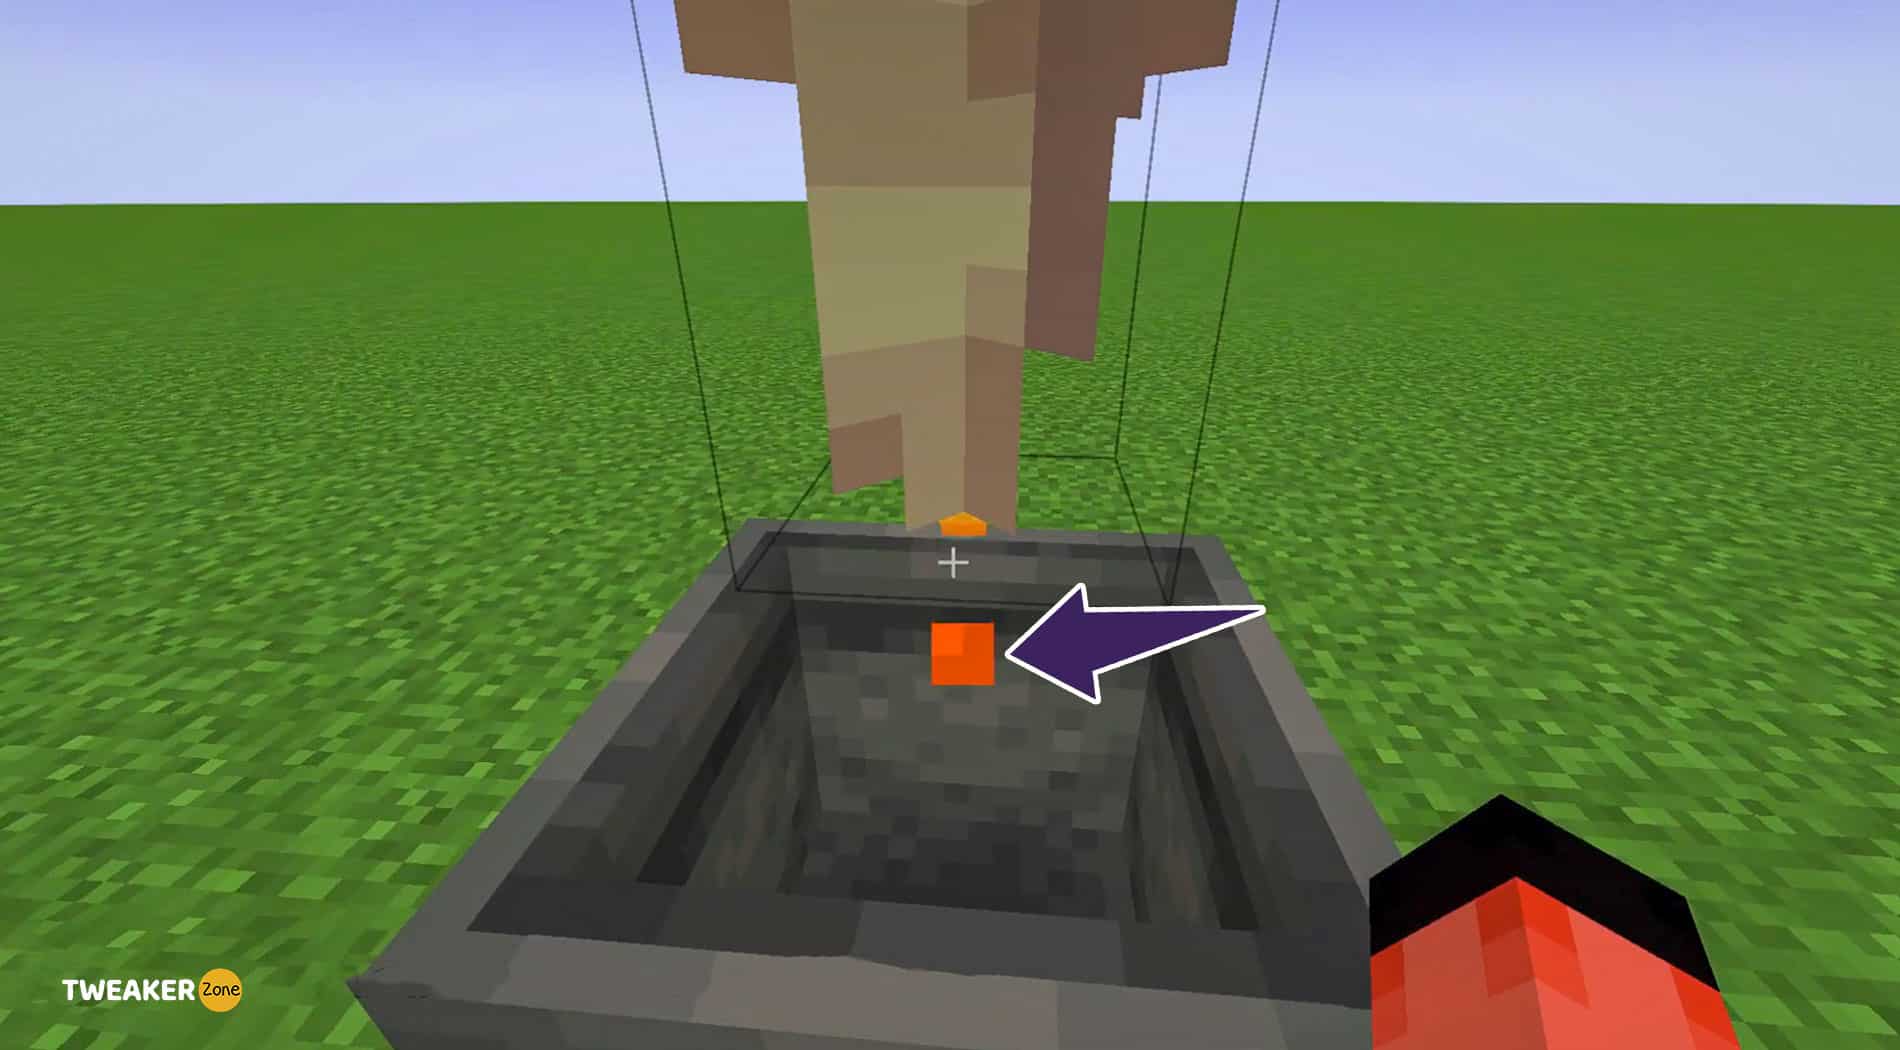 Check if the dripstone is pouring lava into your cauldron or not.